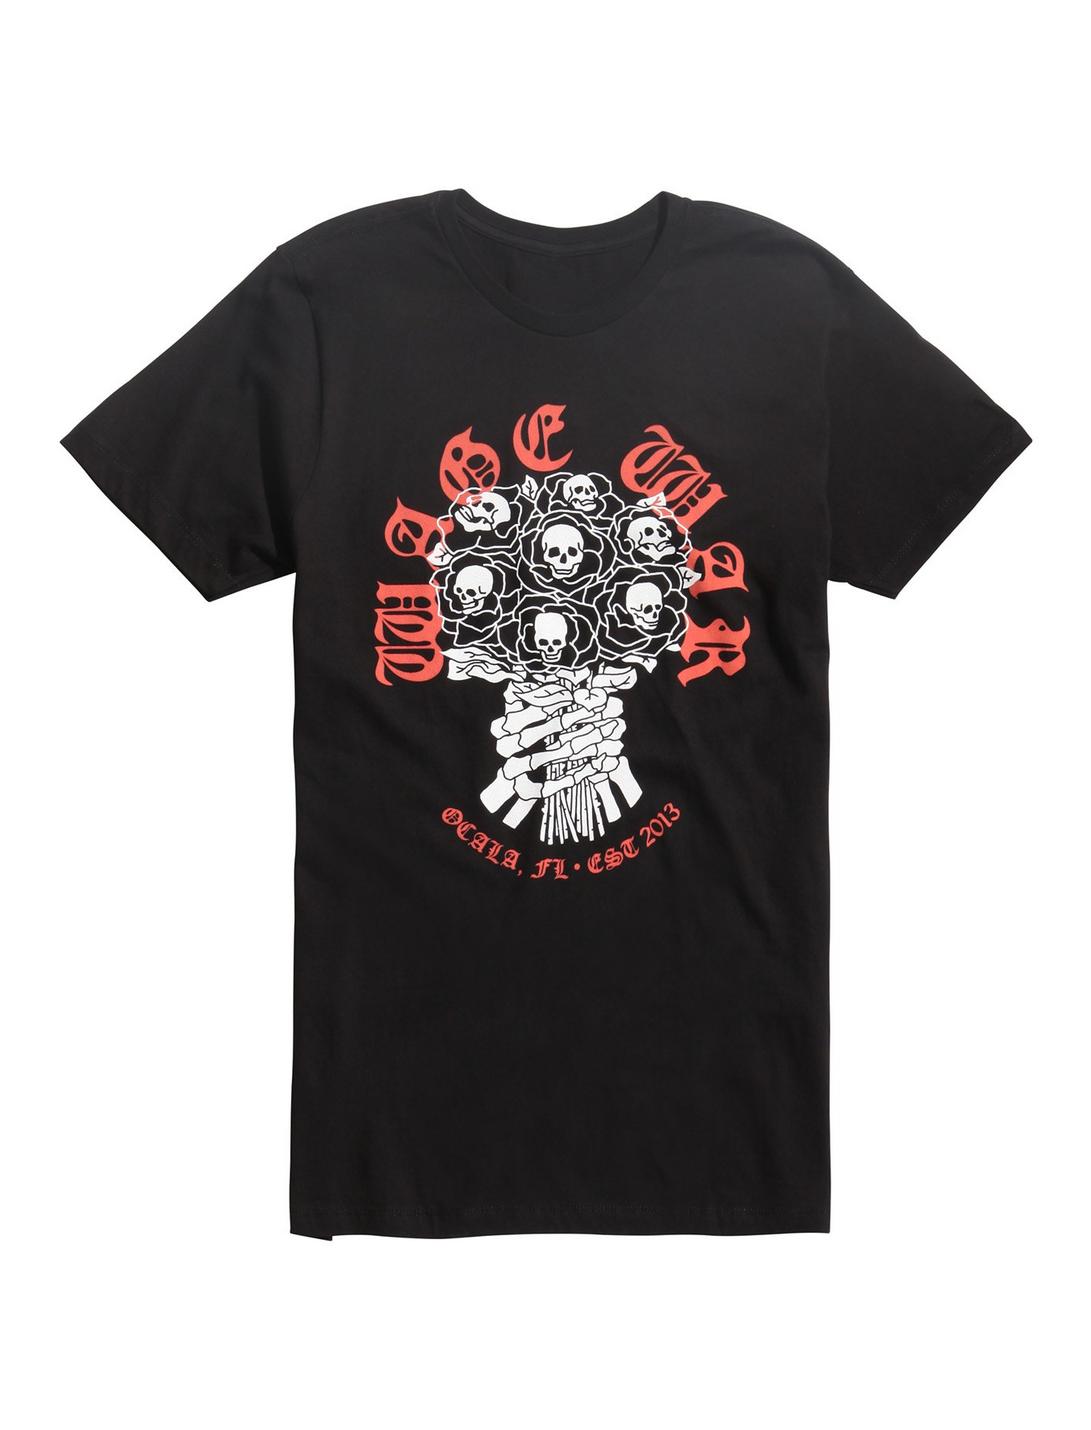 Wage War Smell The Roses T-Shirt, BLACK, hi-res